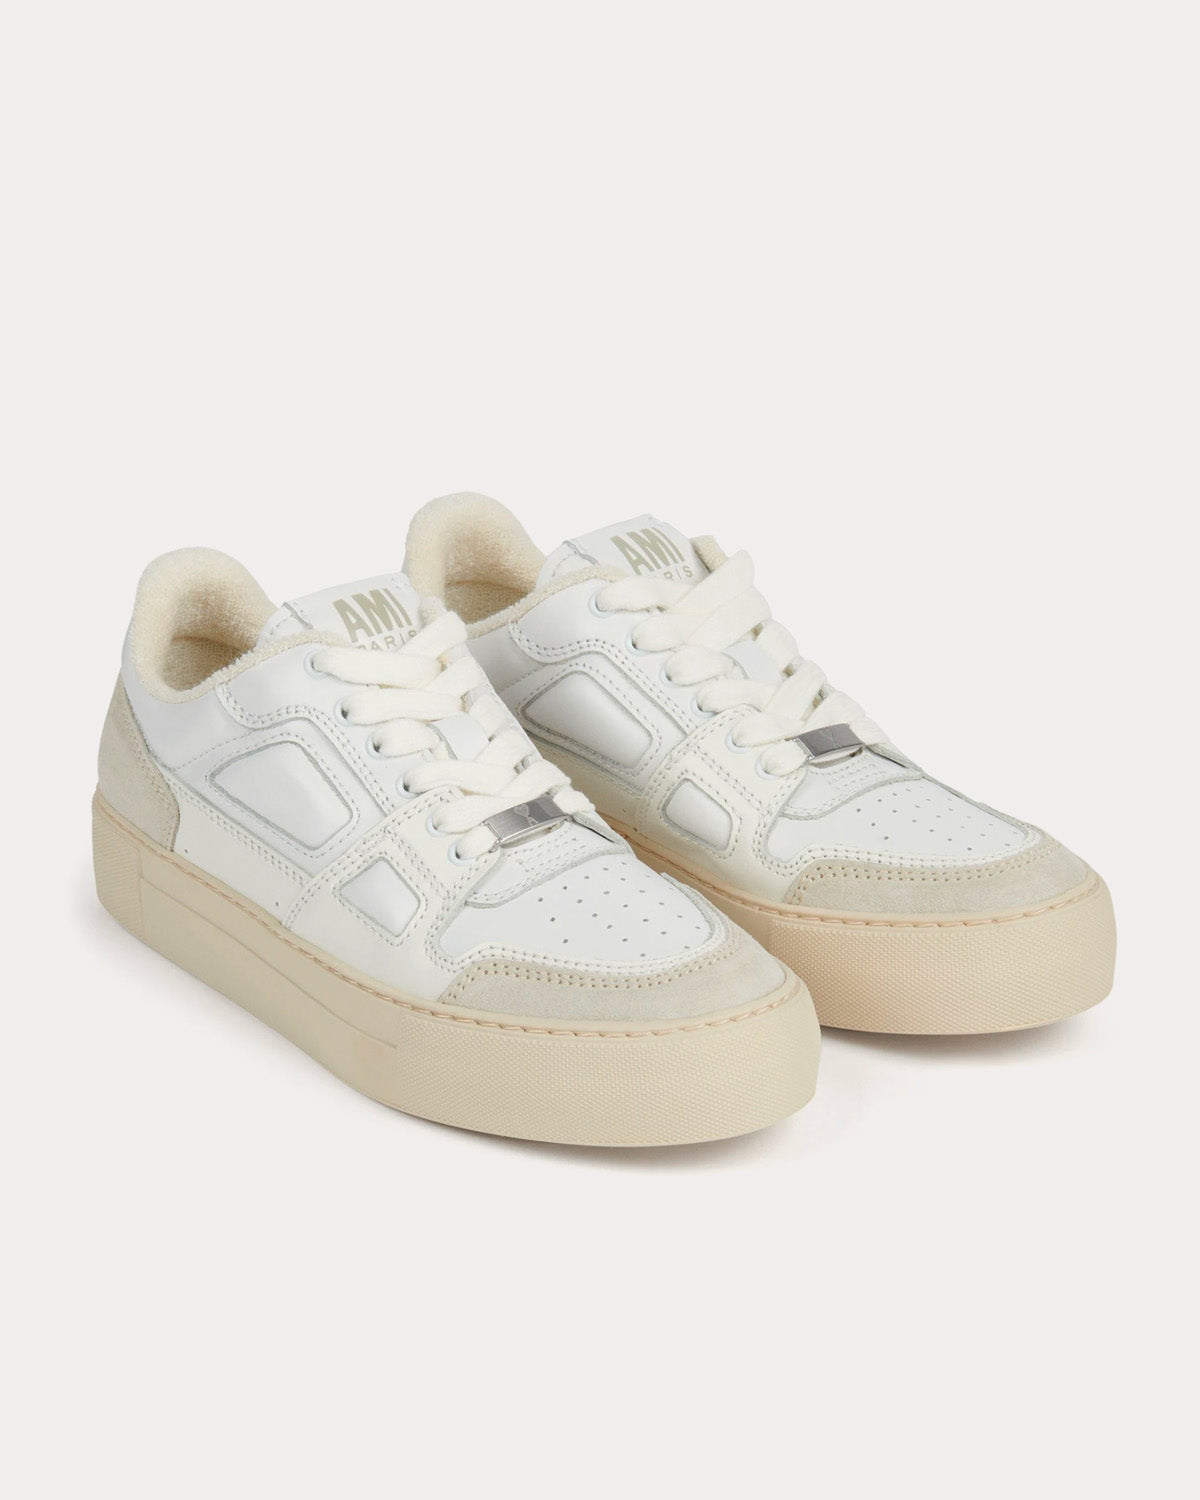 AMI - Arcade White Low Top Sneakers